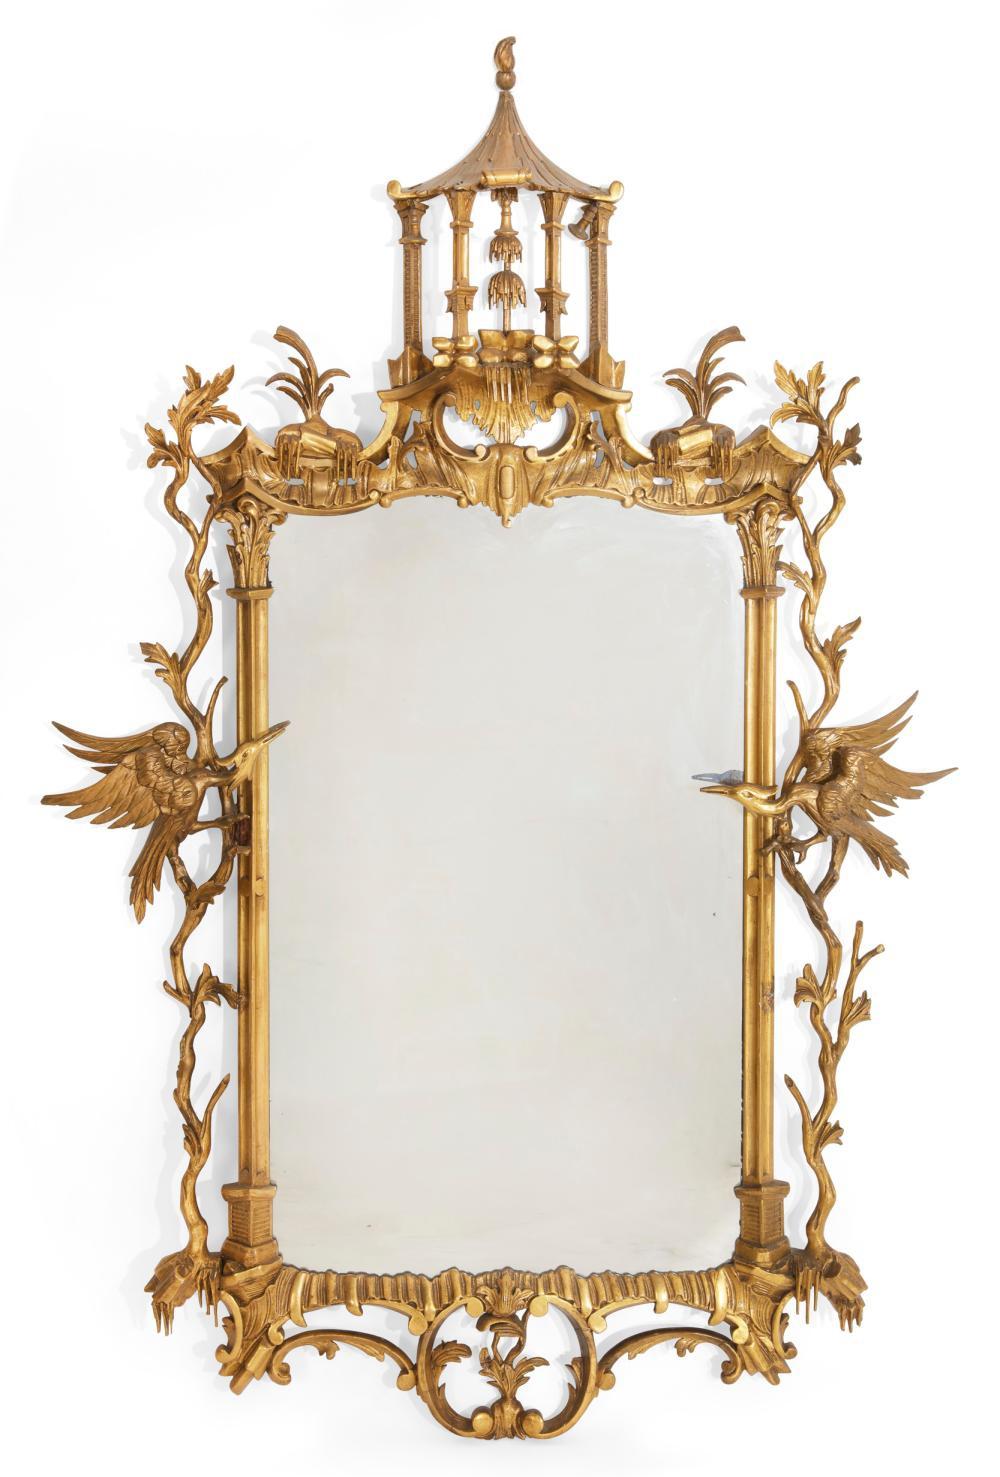 Hand-Carved Chippendale Style Giltwood Mirror With Hoho Birds, 19 Century